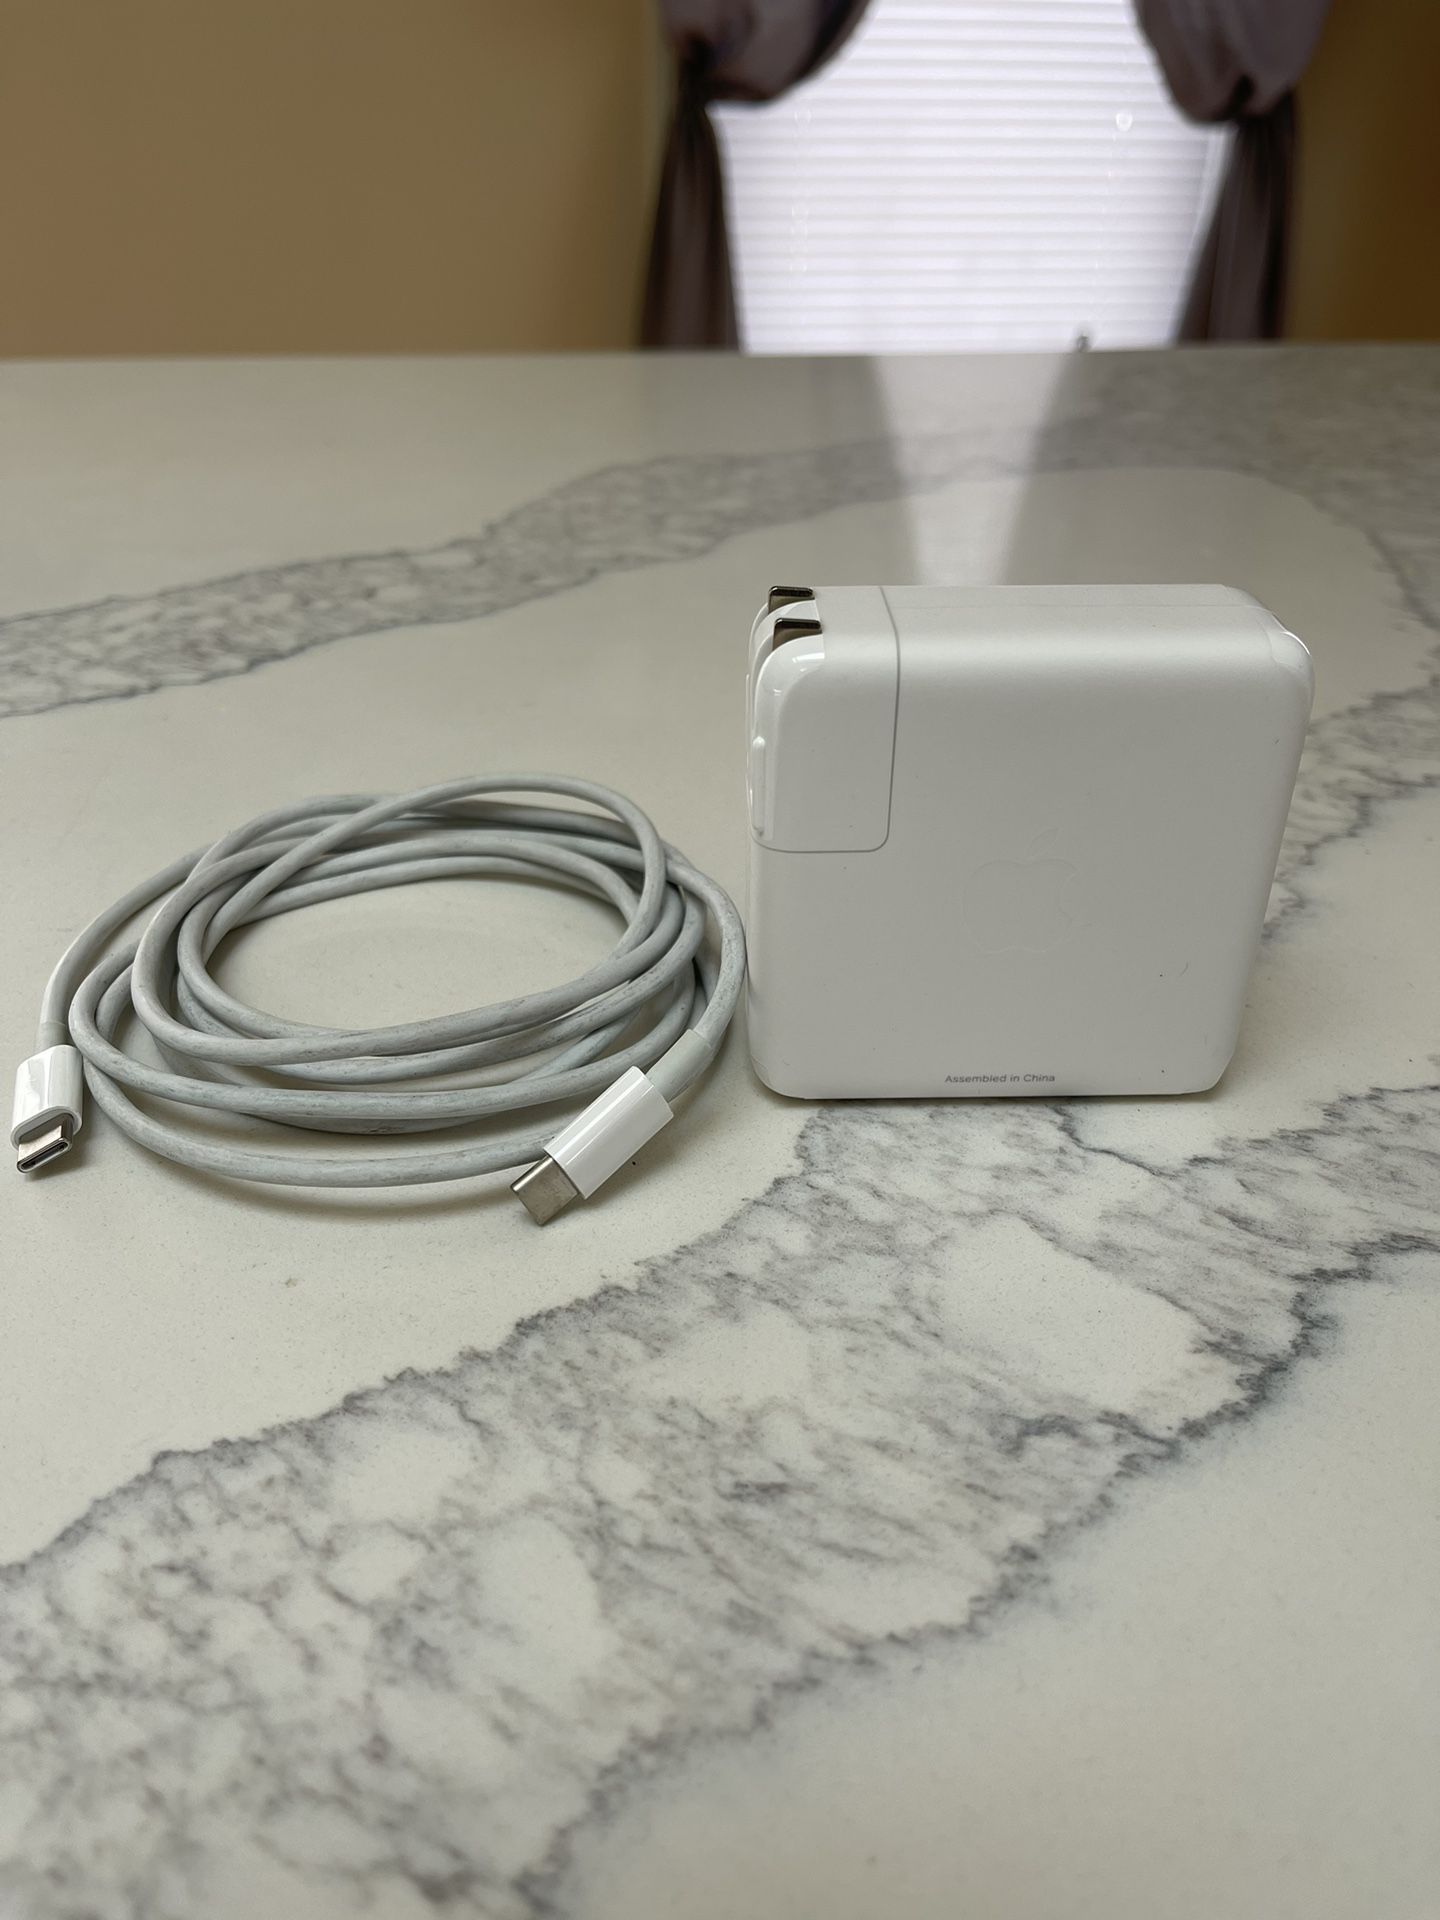 MacBook Charger New From Apple $15 OBO